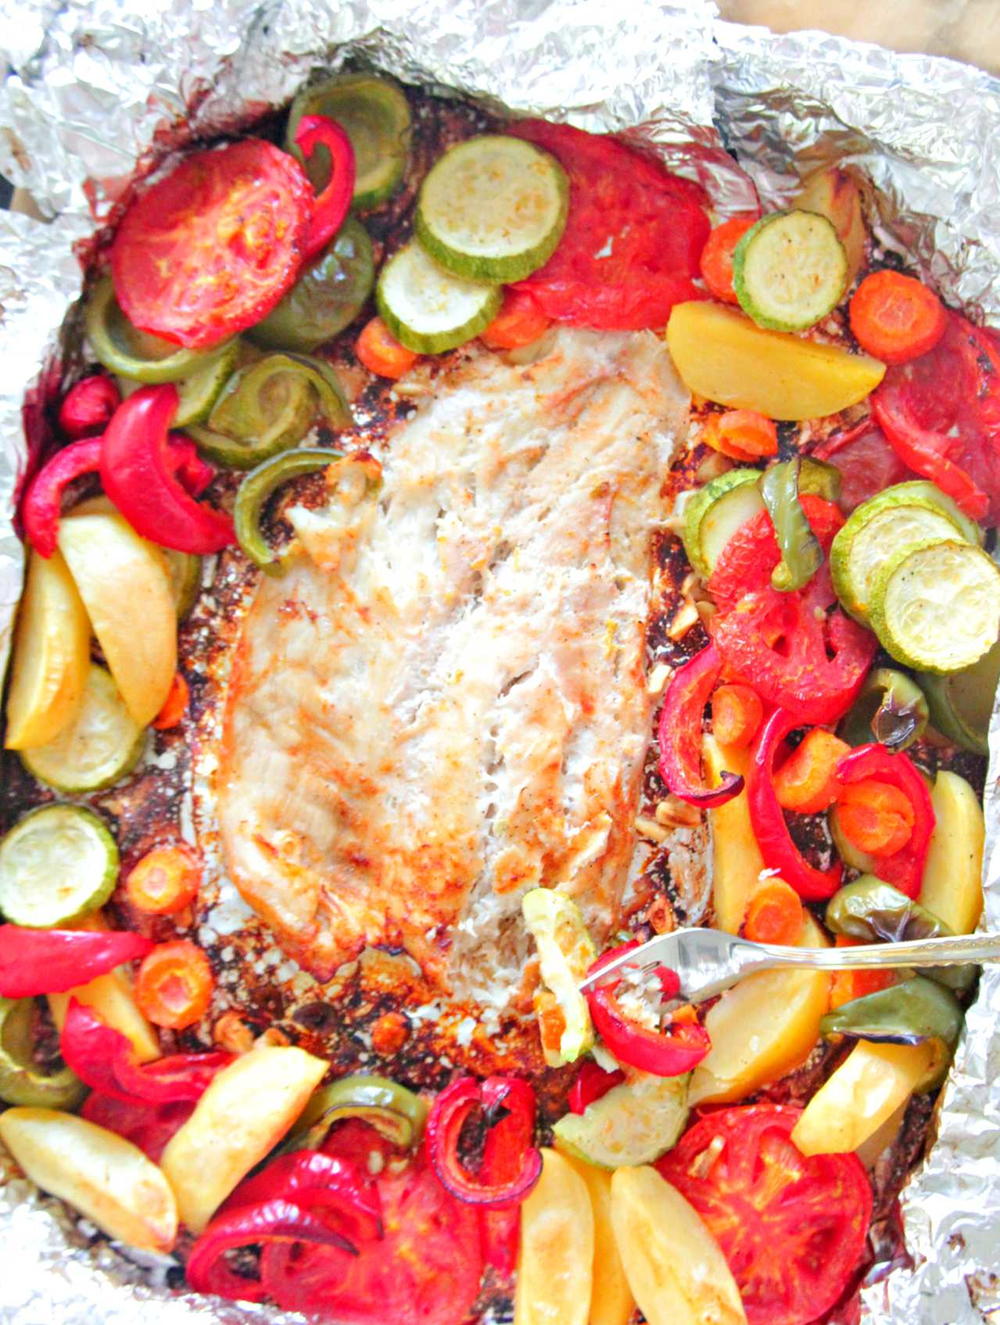 Baked Fish in Foil with Vegetables | RecipeLion.com